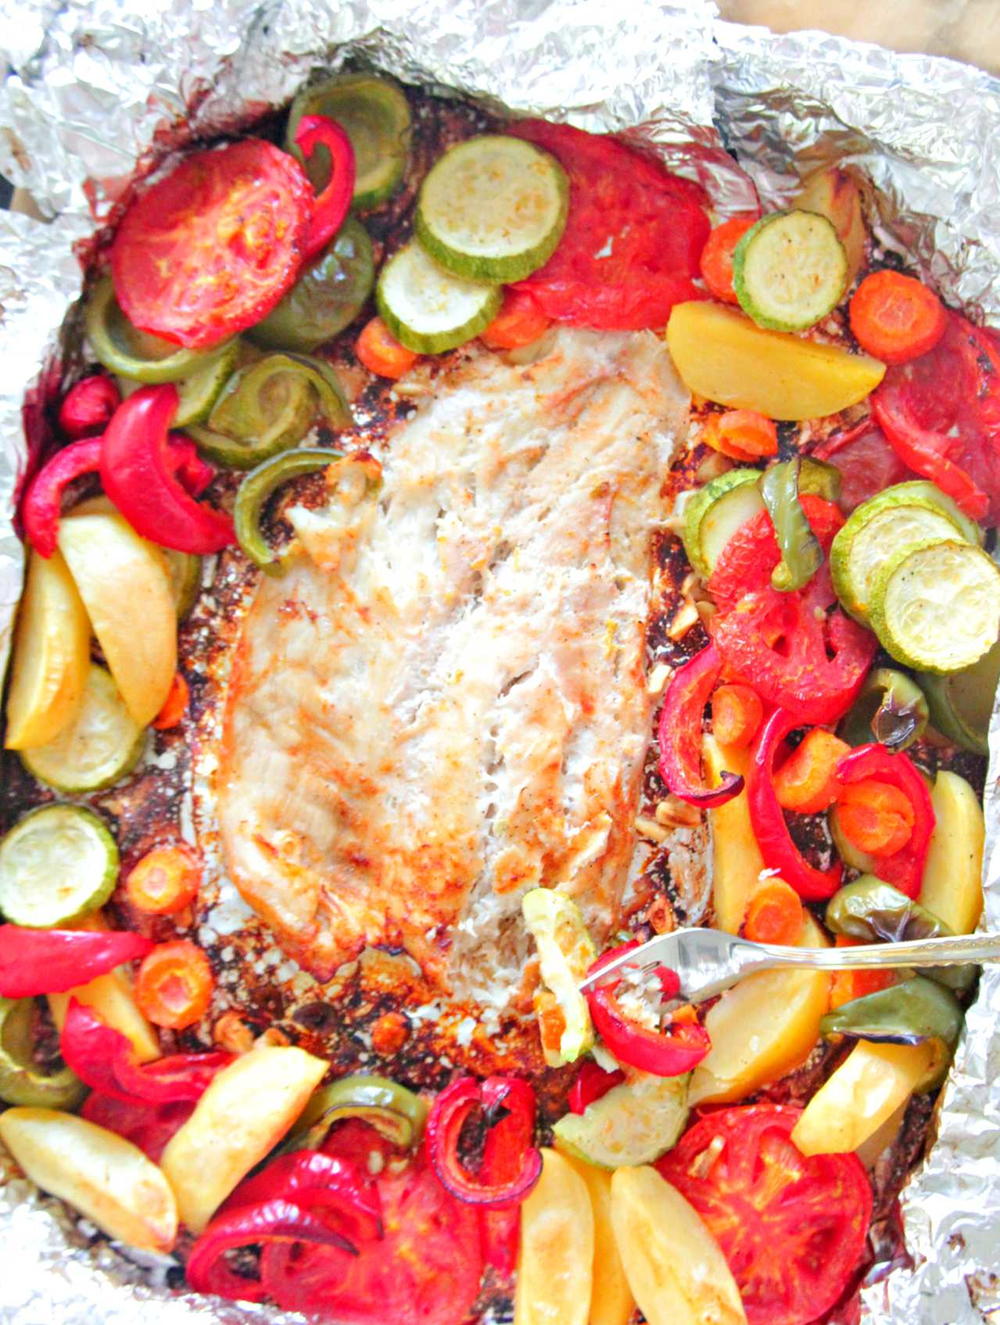 Baked Fish in Foil with Vegetables | RecipeLion.com